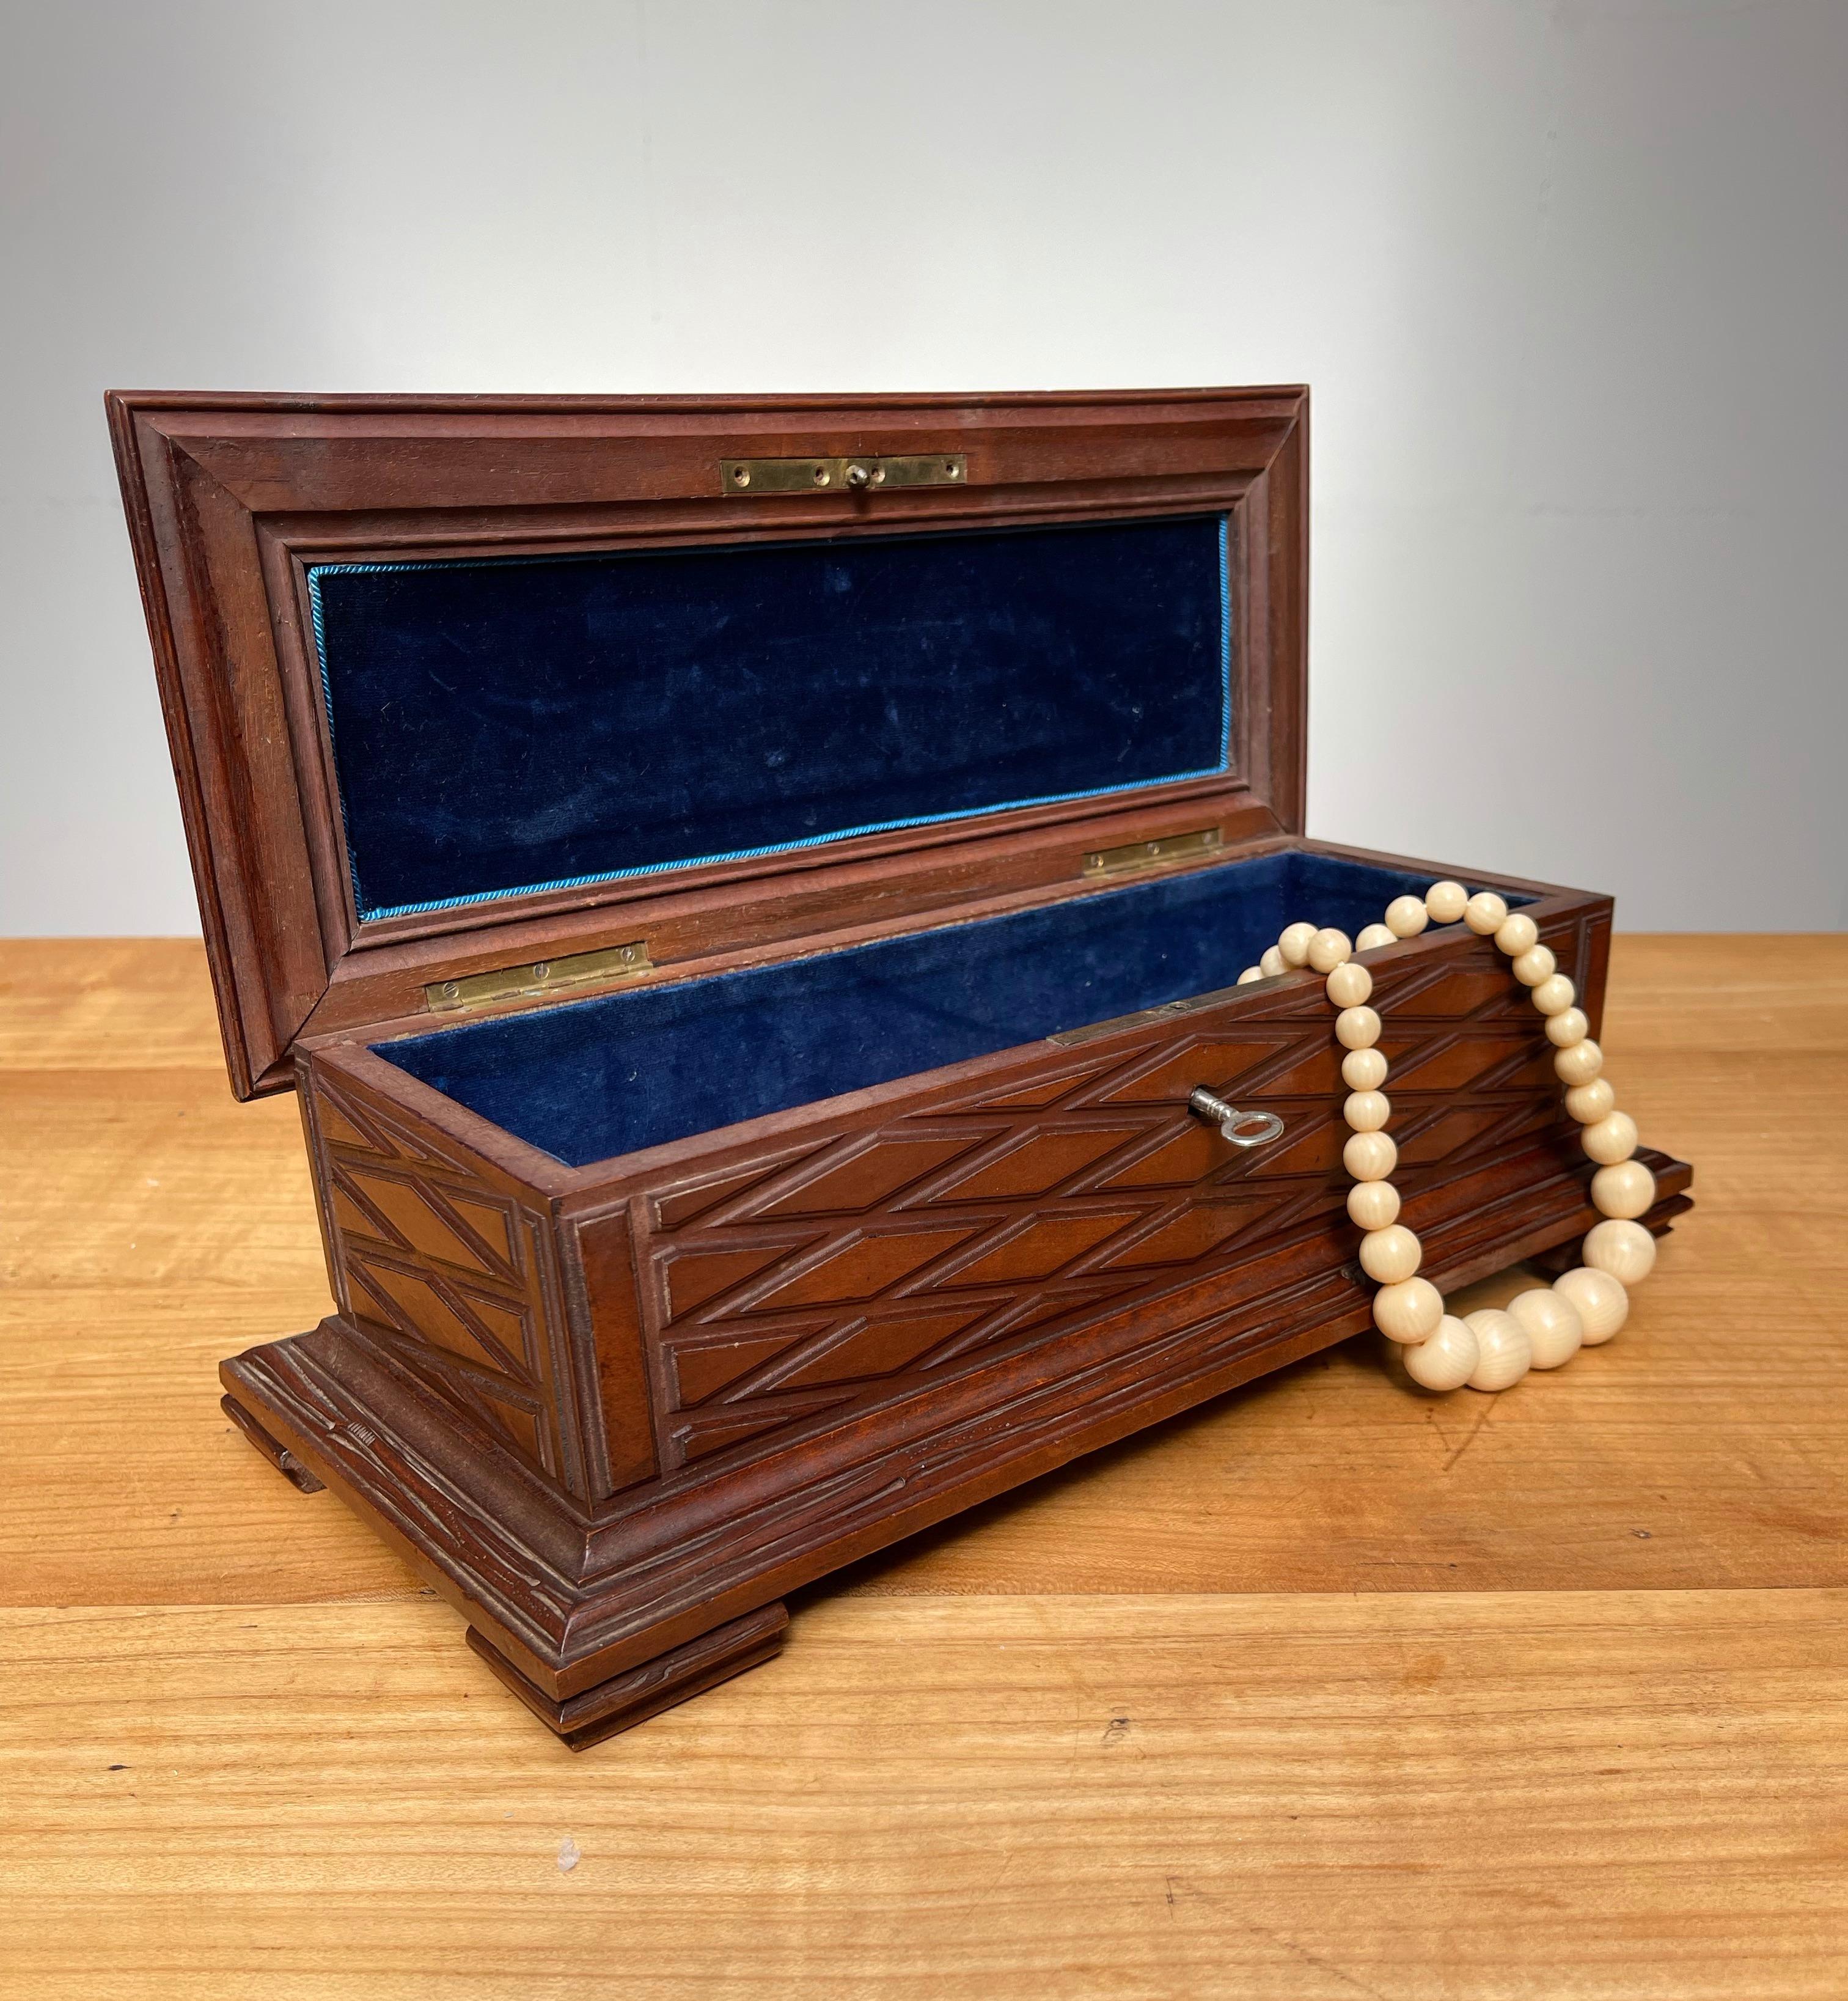 A beautiful and top condition antique black forest jewelry box, carved on all sides.

This rare and large jewelry box makes a beautiful accessory for a lady with an eye for fine arts. It is a very well fine carved gem and highly practical with a